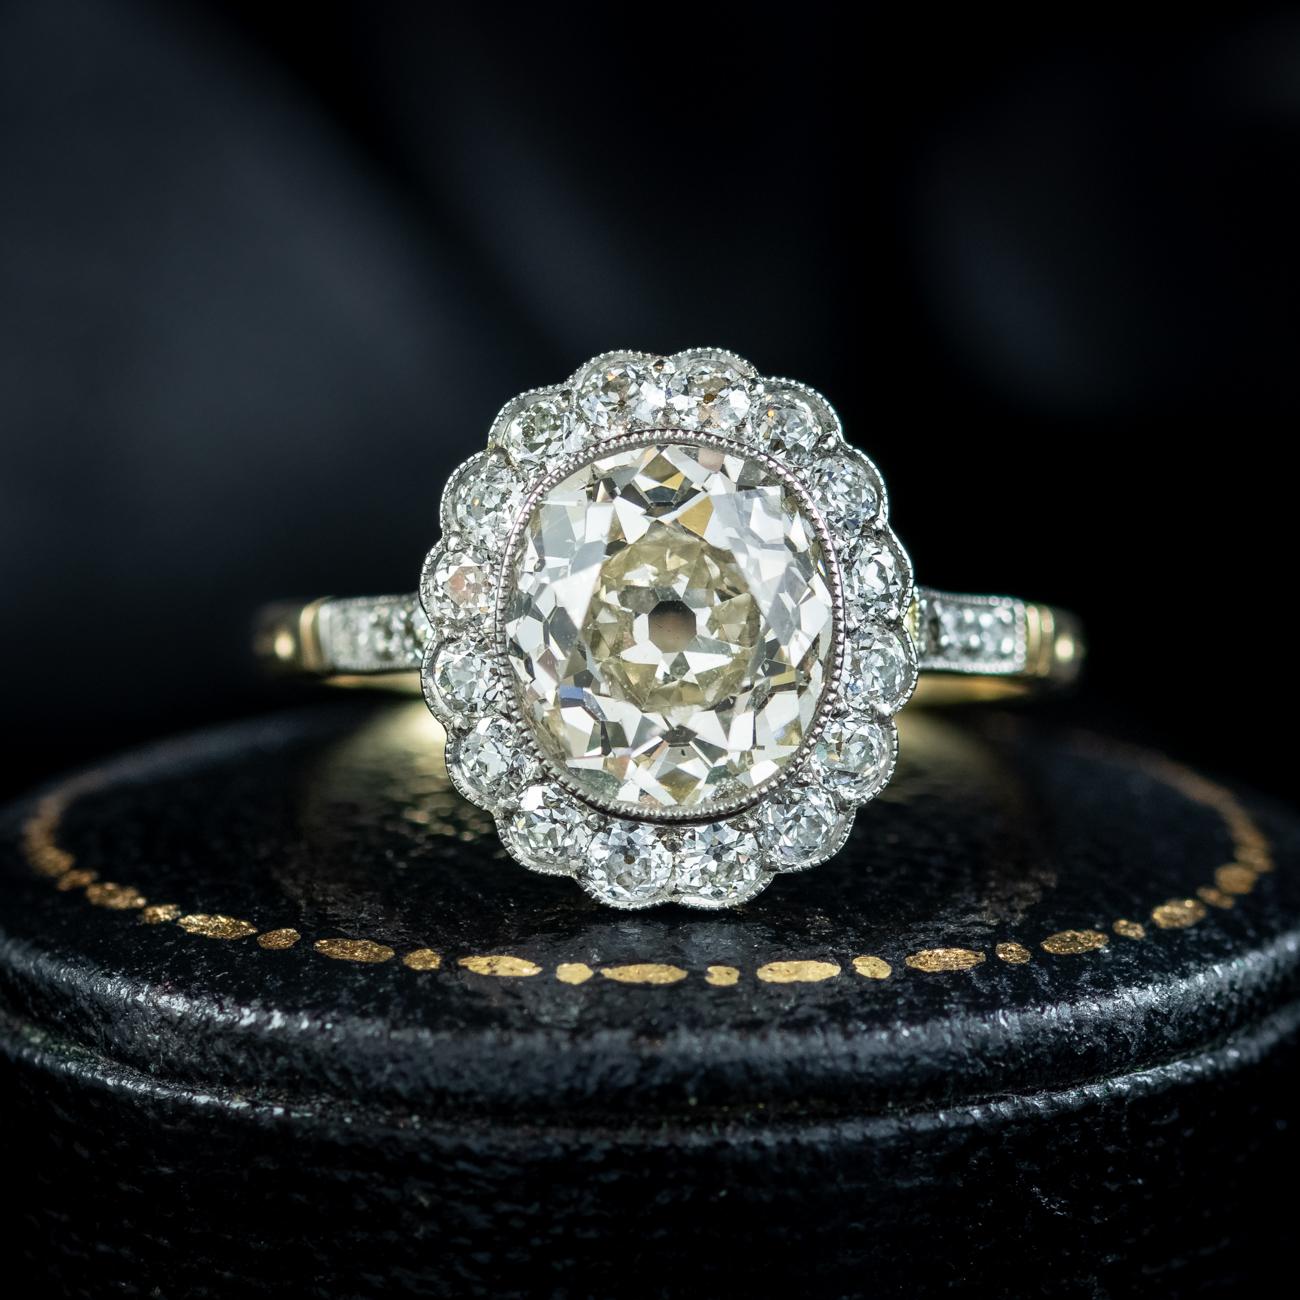 Antique Edwardian Fancy Diamond Cluster Ring 3ct of Diamond with Cert 5